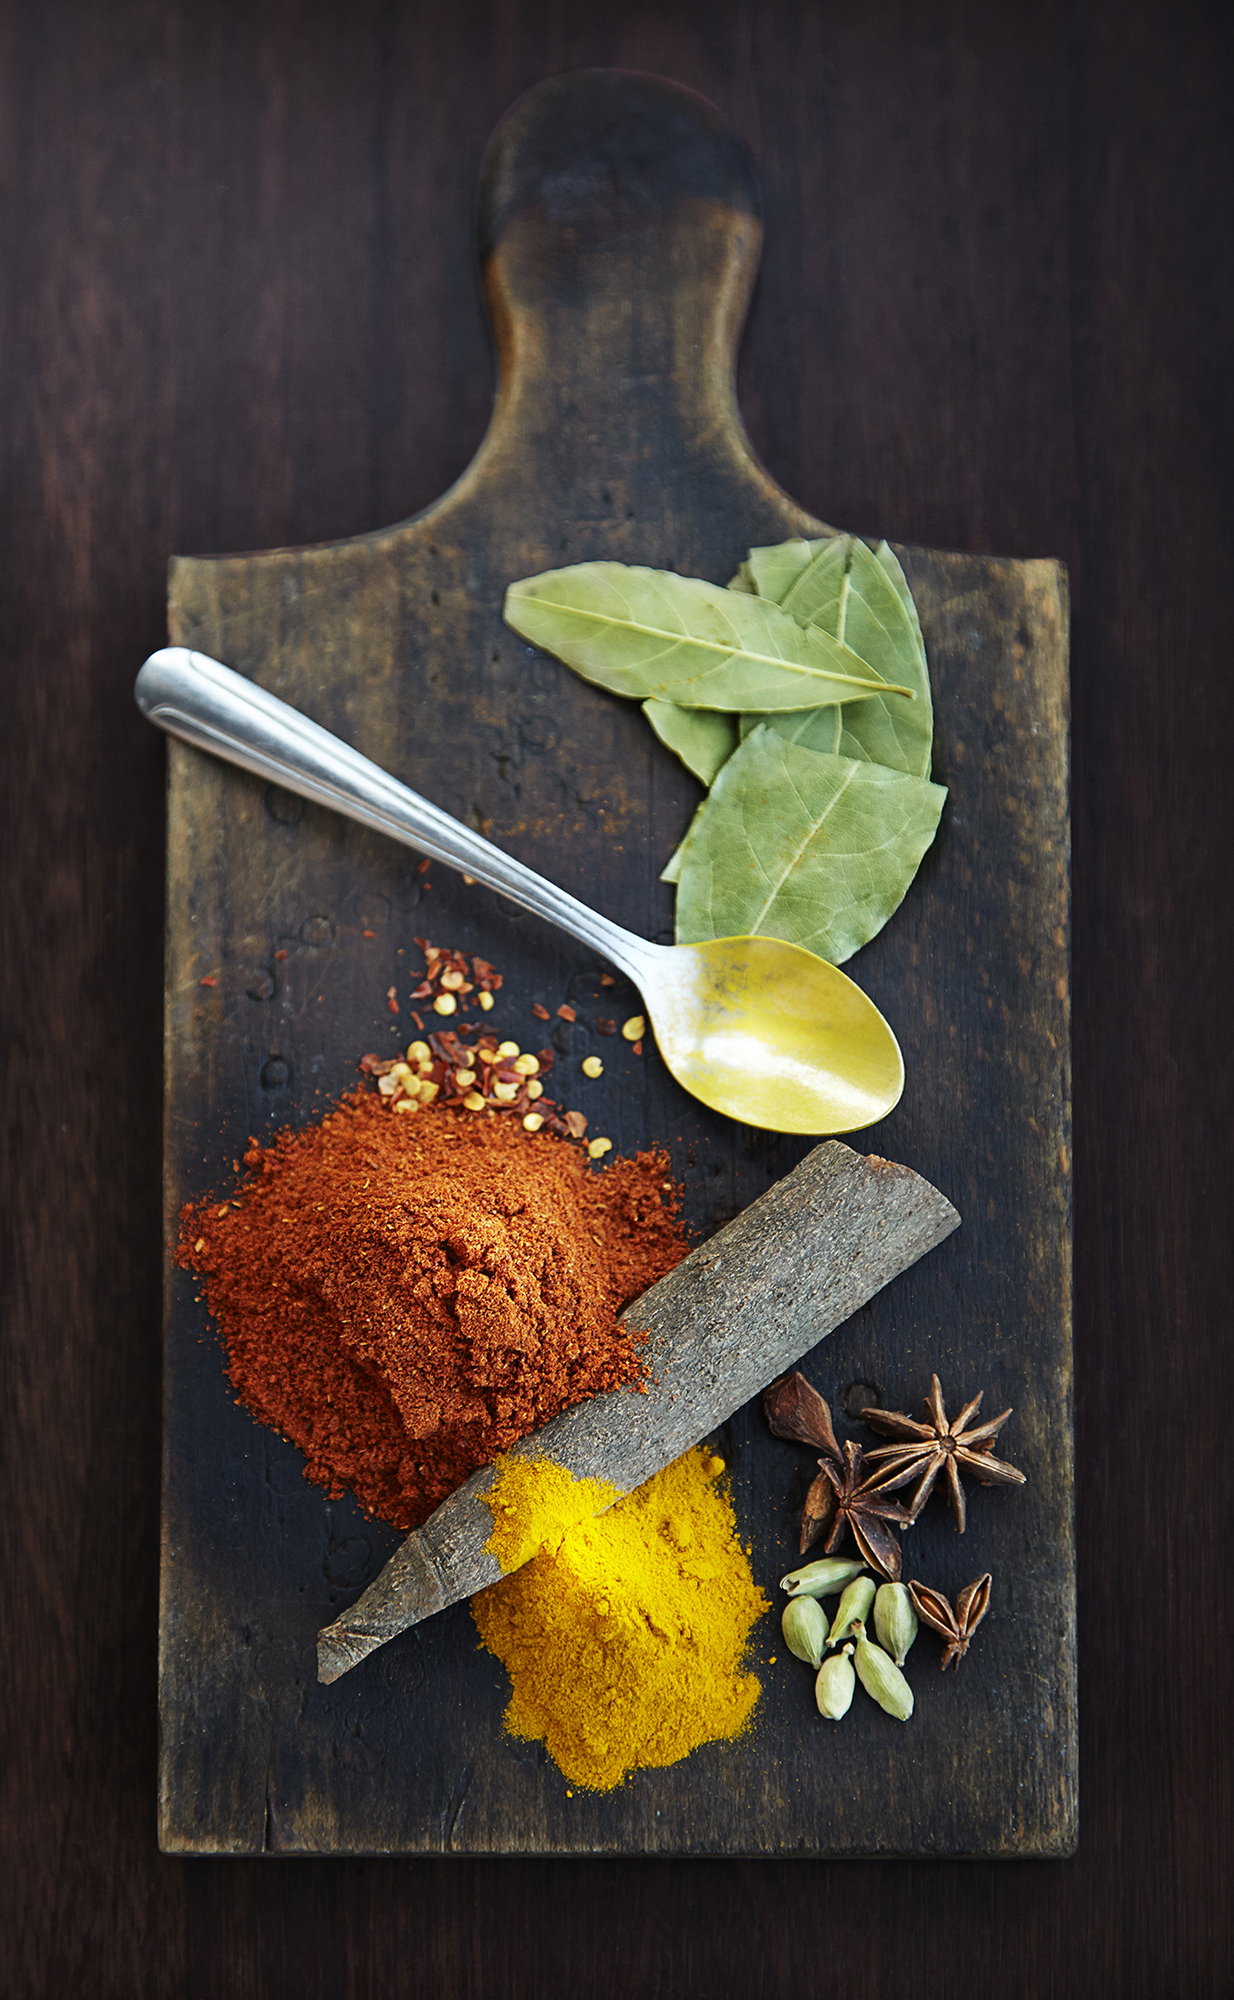 Chelsea Bloxsome | Food Photographer London Glouster0414 0086spice 1